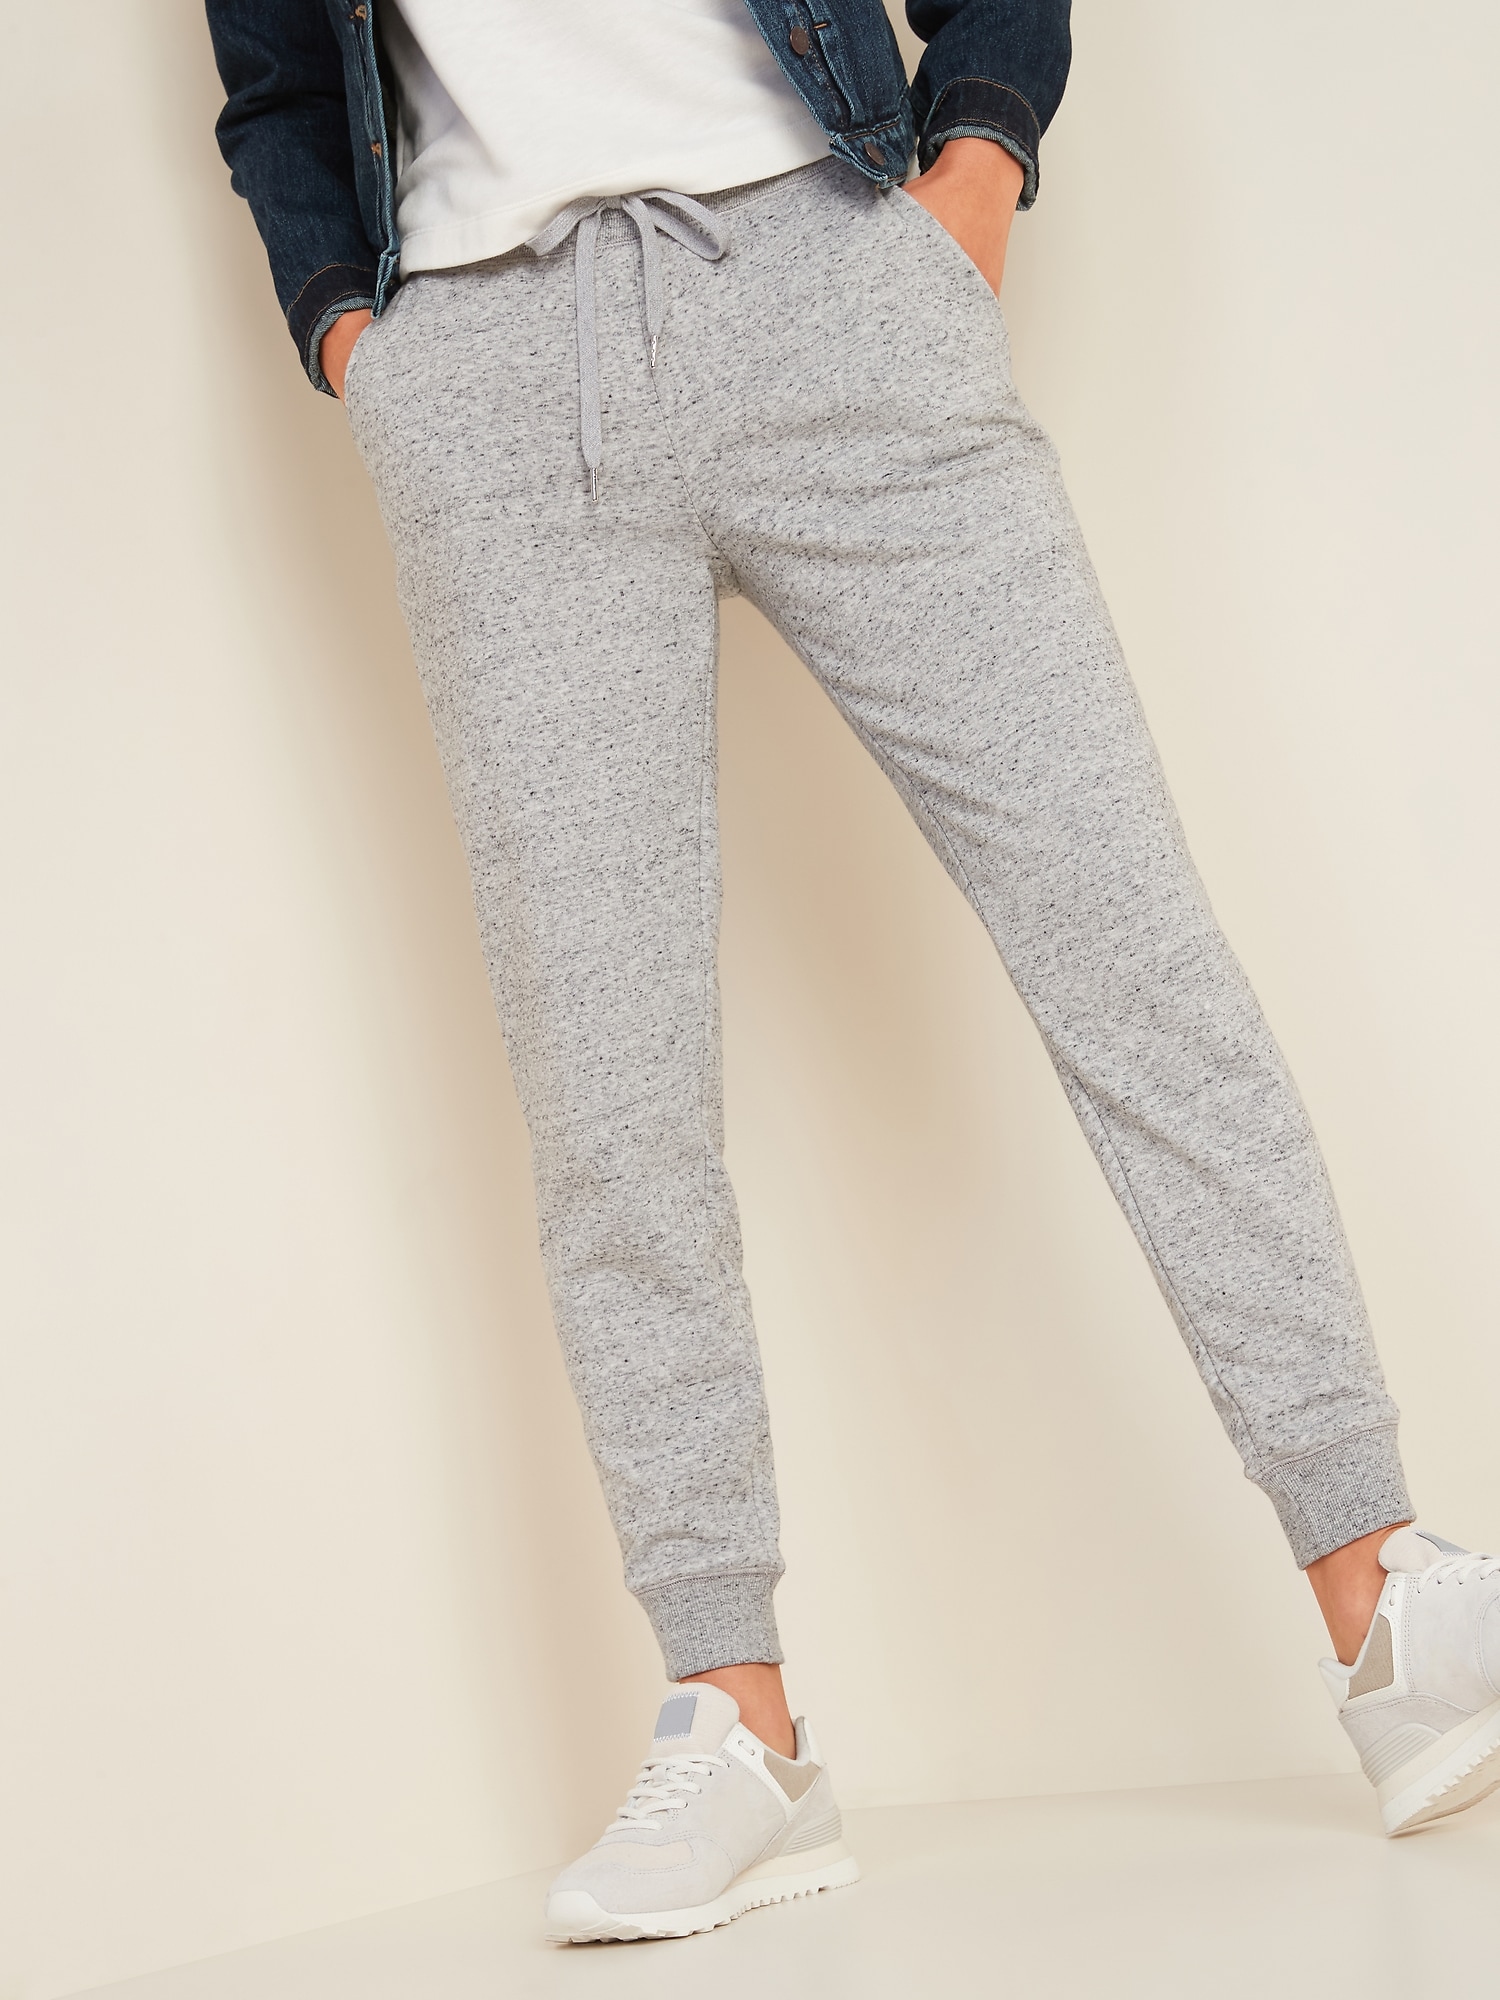 Old Navy Mid-Rise Vintage Street Jogger Sweatpants for Women - ShopStyle  Activewear Pants